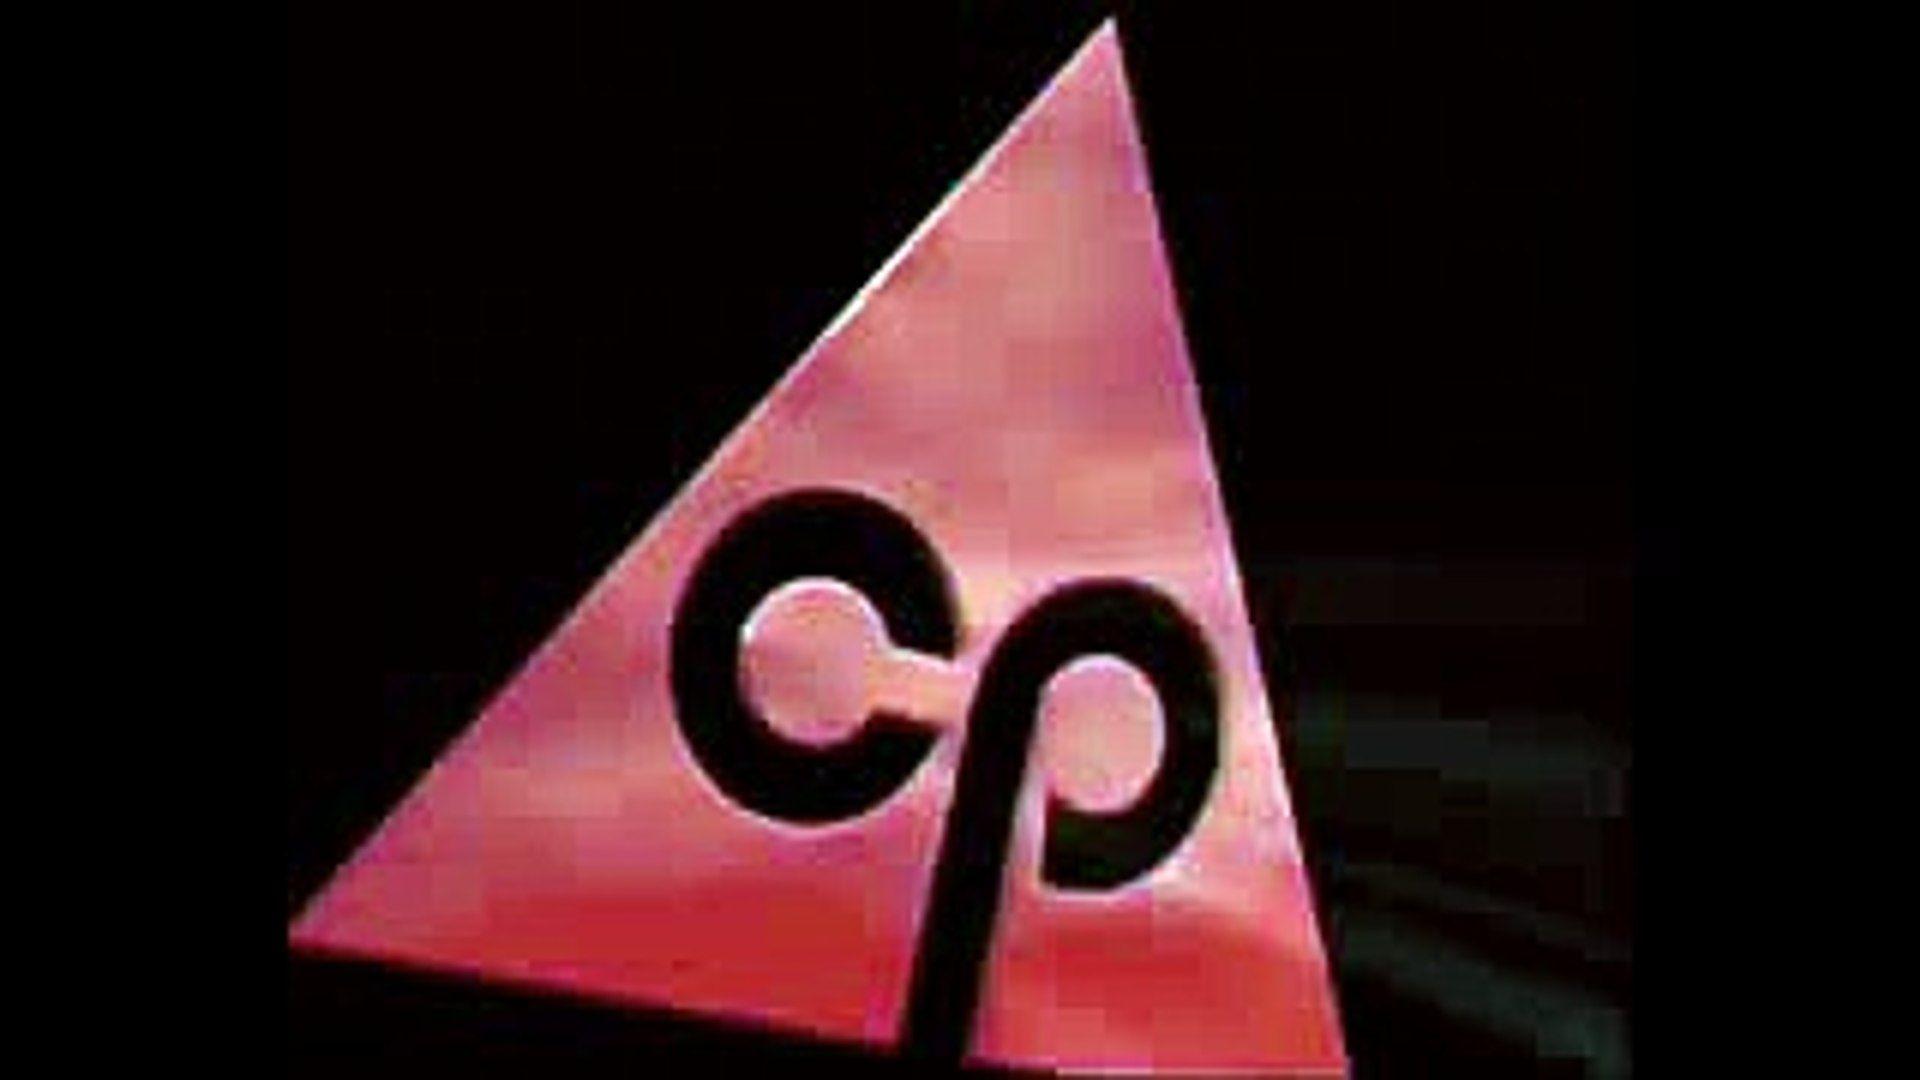 Macrovision Logo - Here is the very short CP Macro-Vision logo you would ever see!